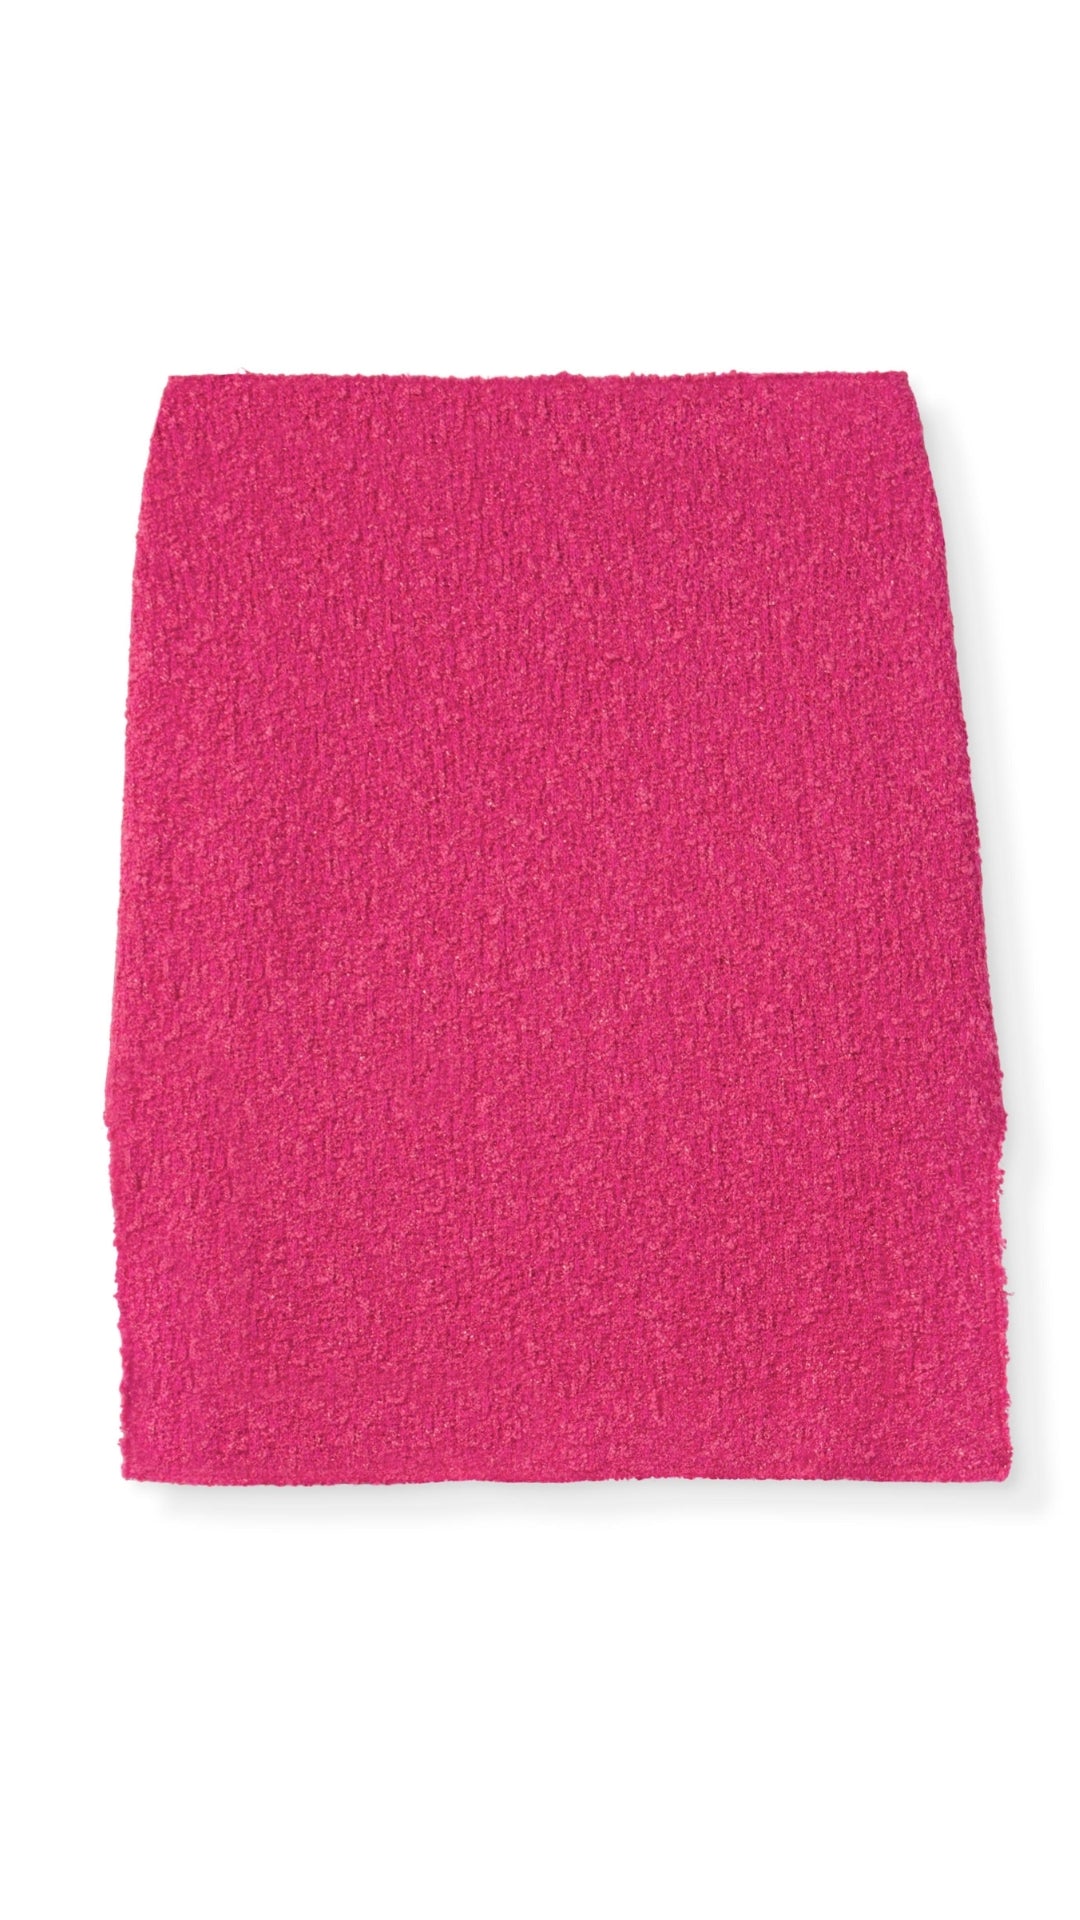 St. John Boucle Knit Skirt Hot Pink Mini Skirt Metallic Luxury Knitwear Experience 27 Madrid with side hem cut outs. Product photo front facing.